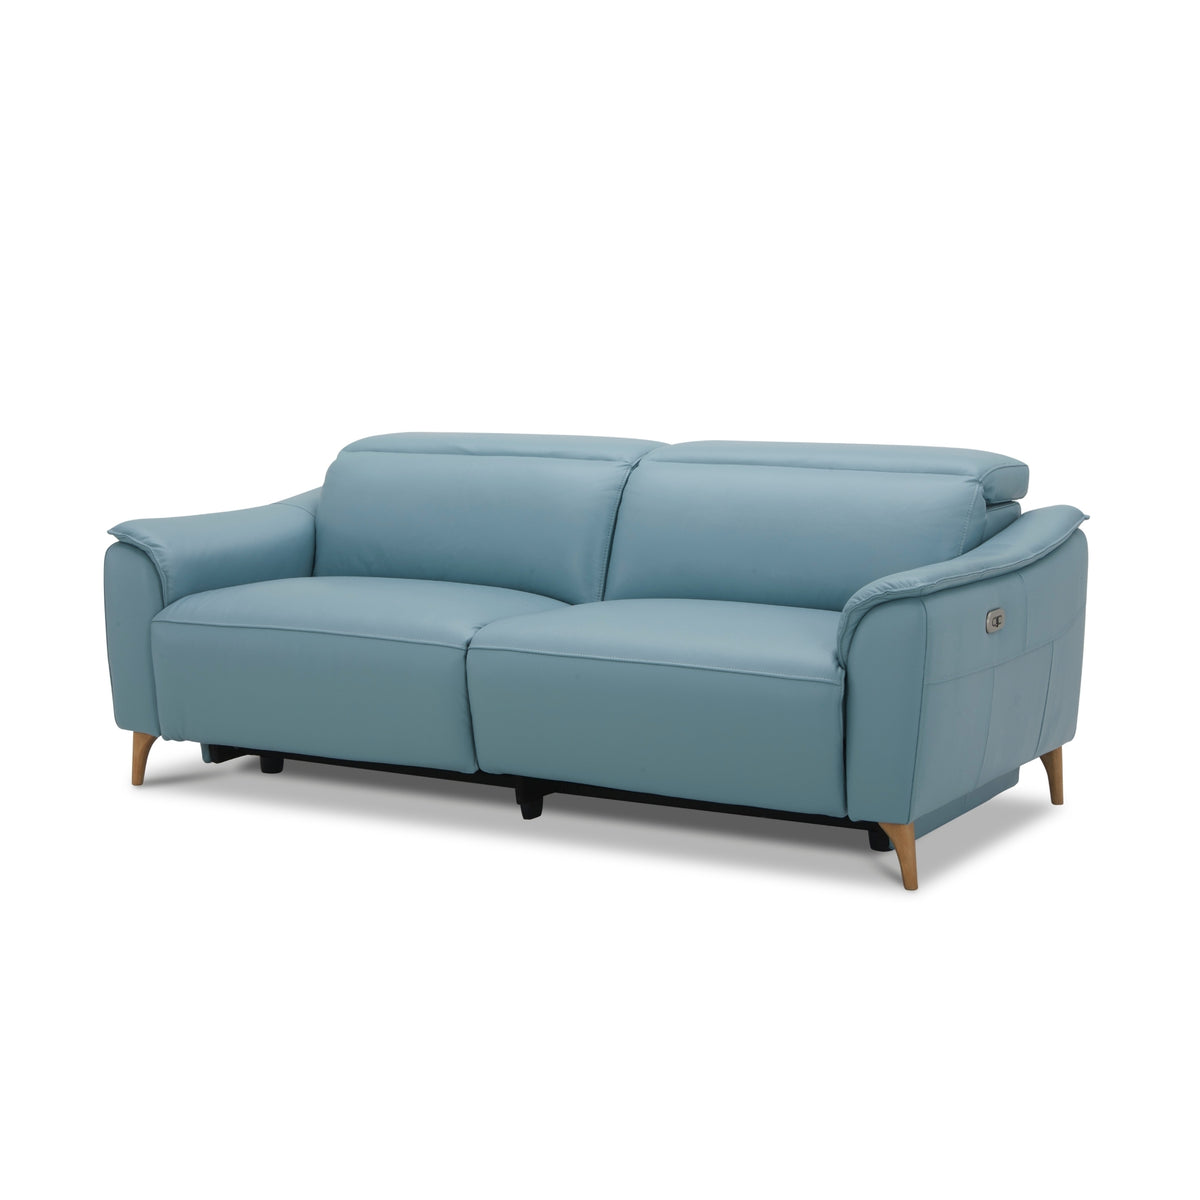 Inala 2.5 Seater Leather Electric Recliner Sofa Blue 